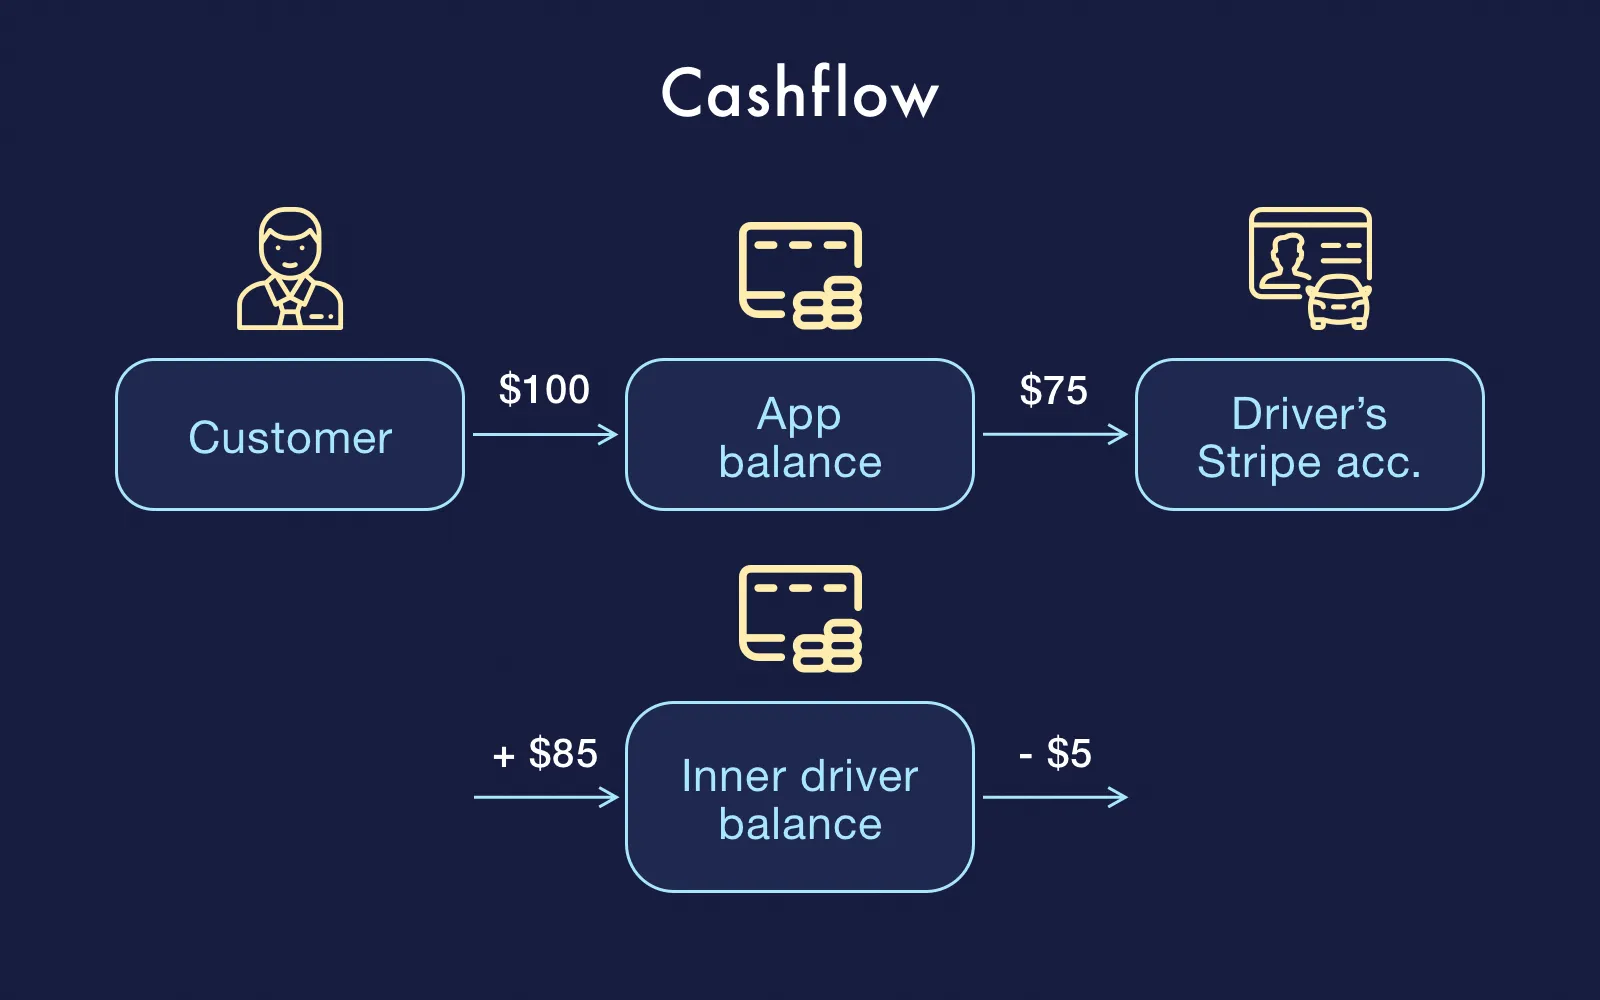 Cashflow for the second example